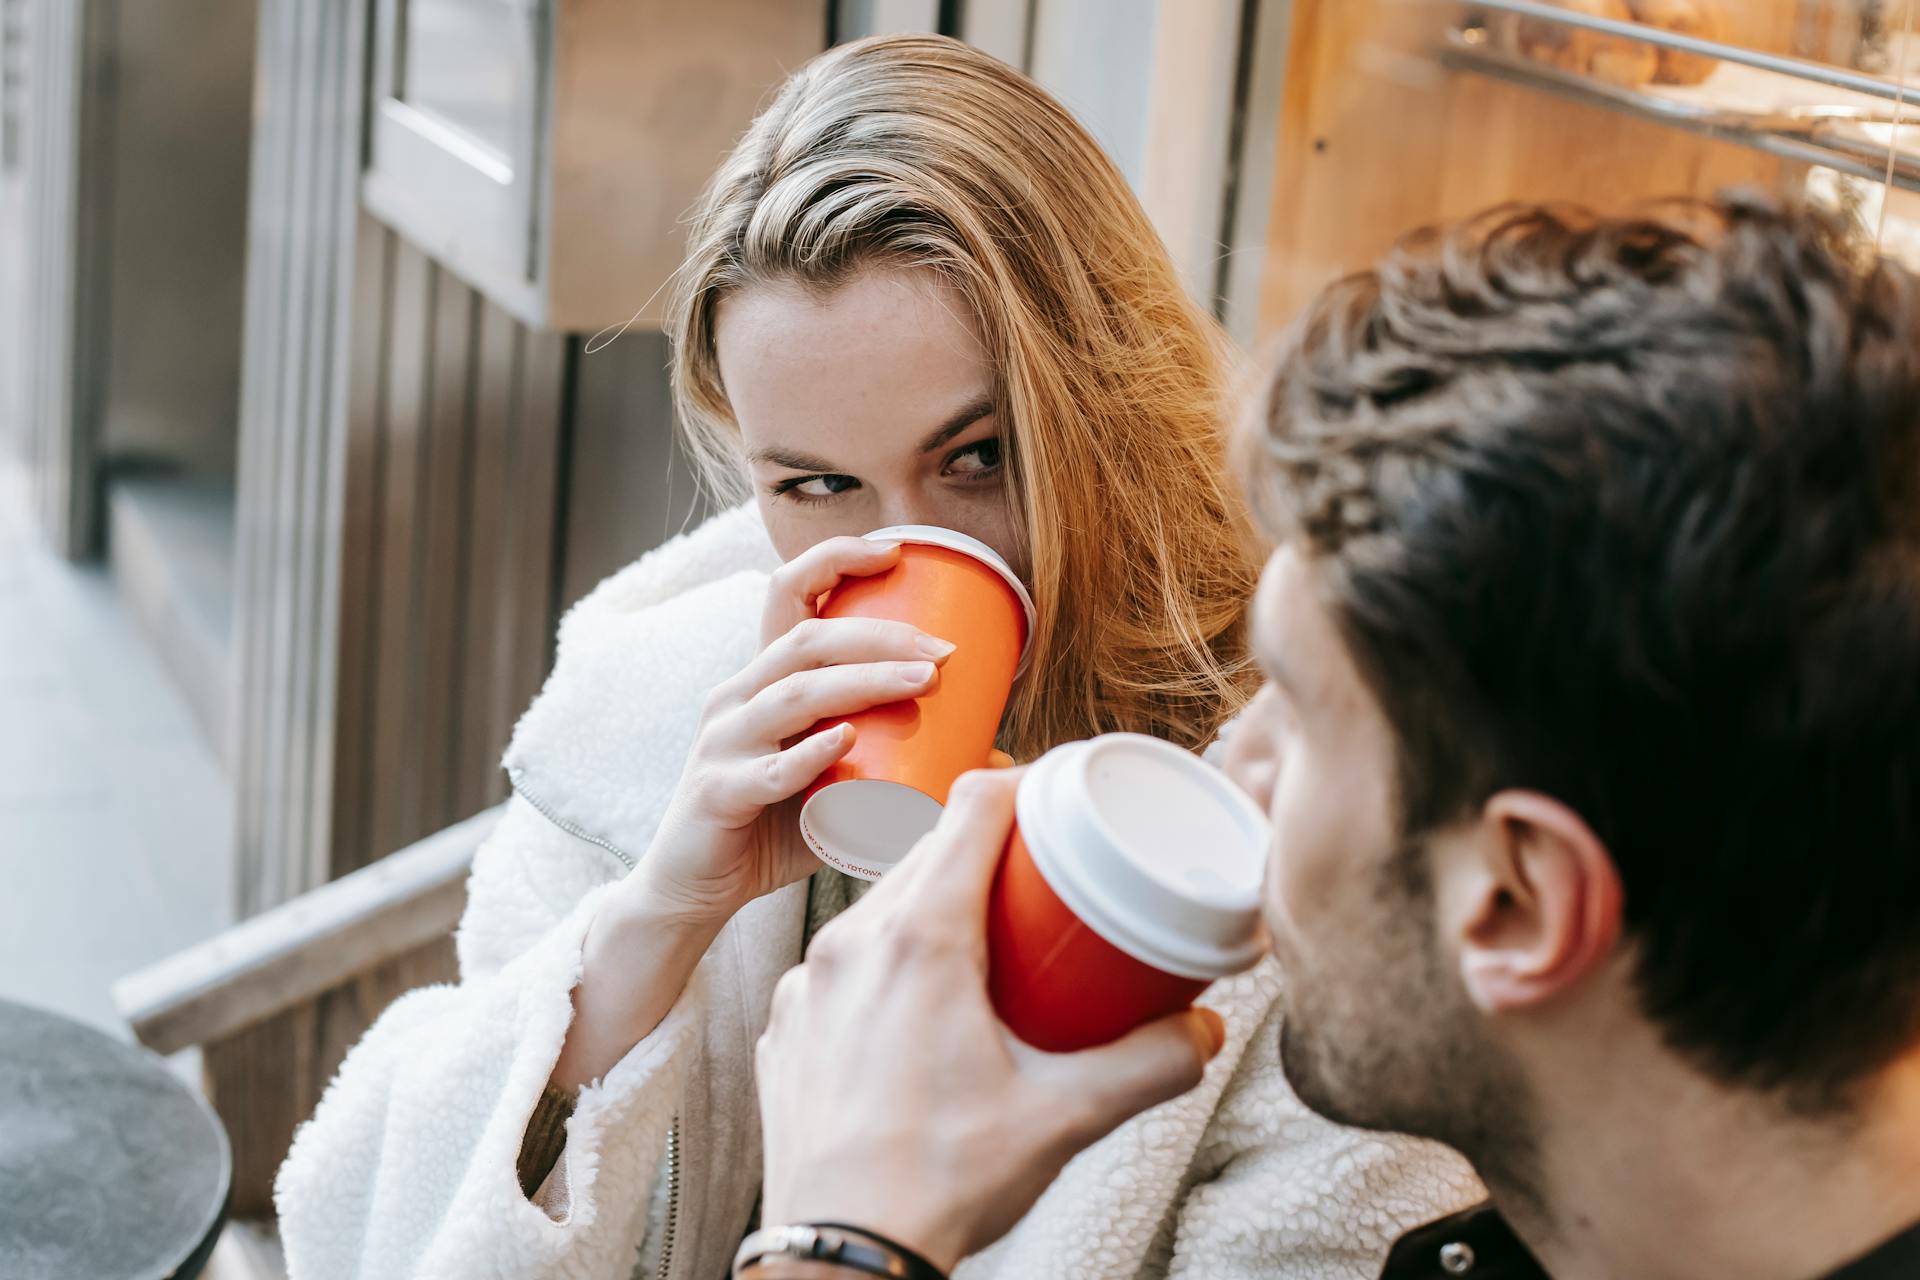 A woman drinking coffee | Source: Pexels